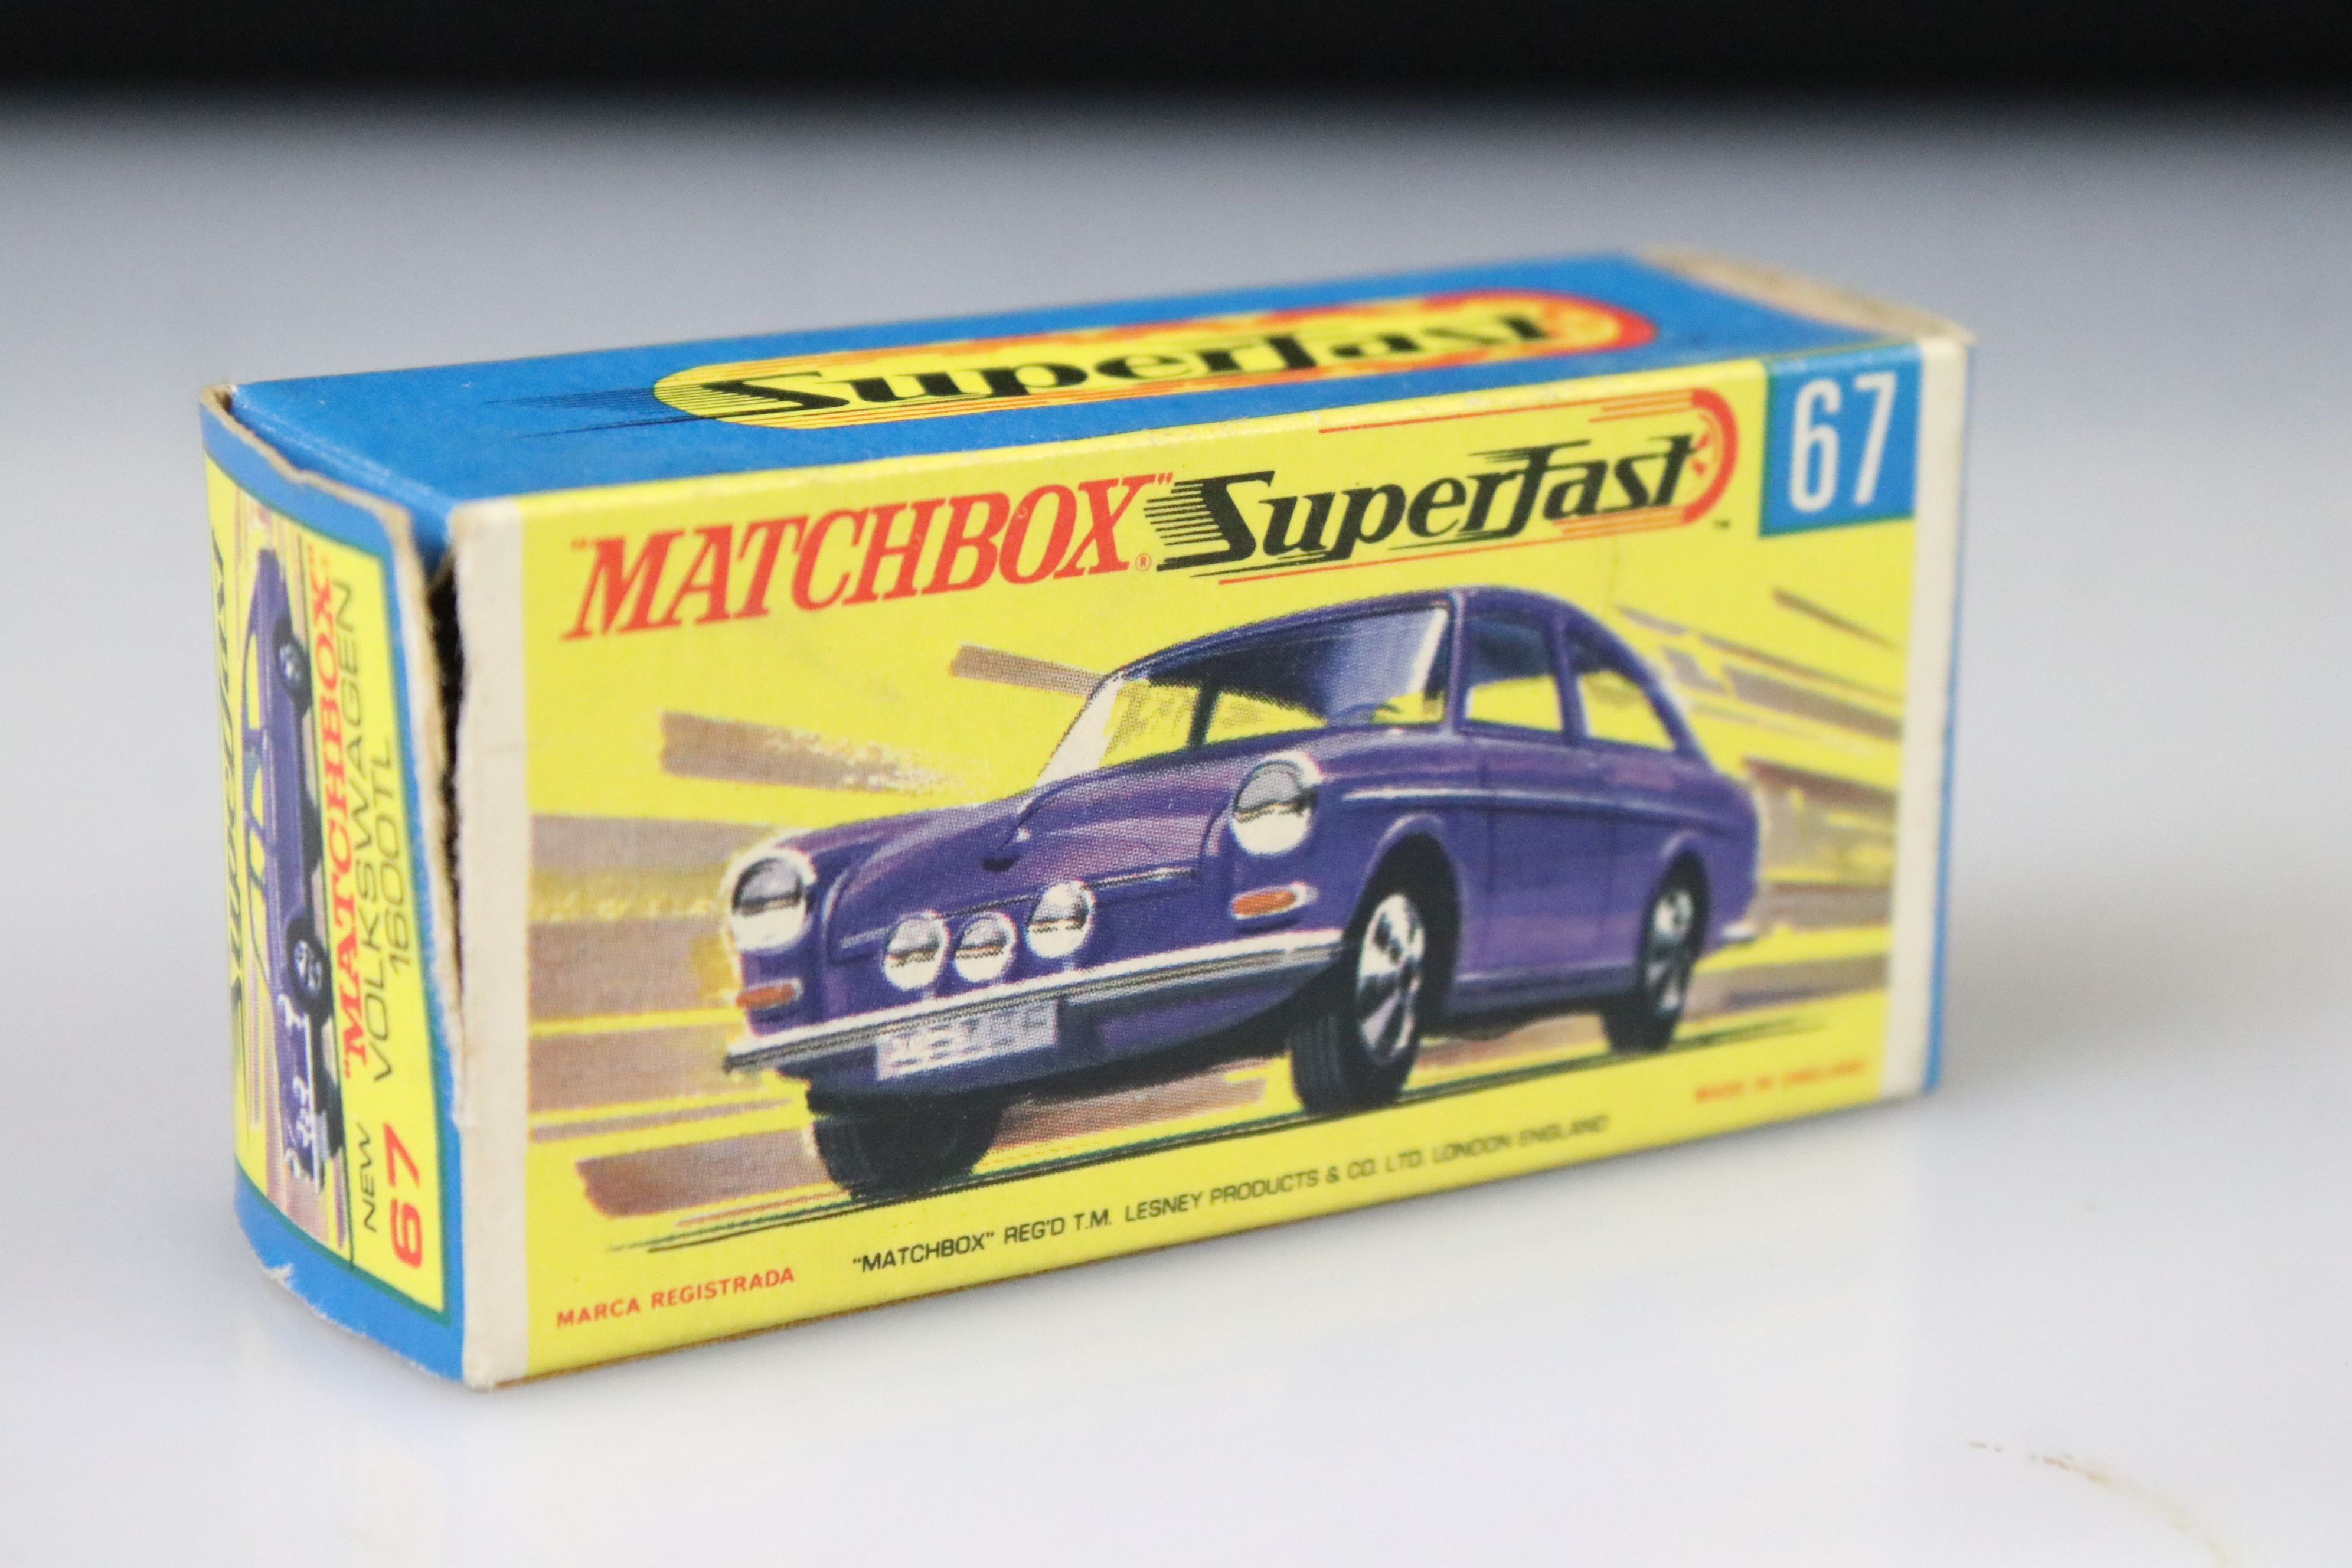 17 Boxed Matchbox Superfast diecast models to include 41 Ford GT, 29 Racing Mini, 57 Landrover - Image 53 of 53